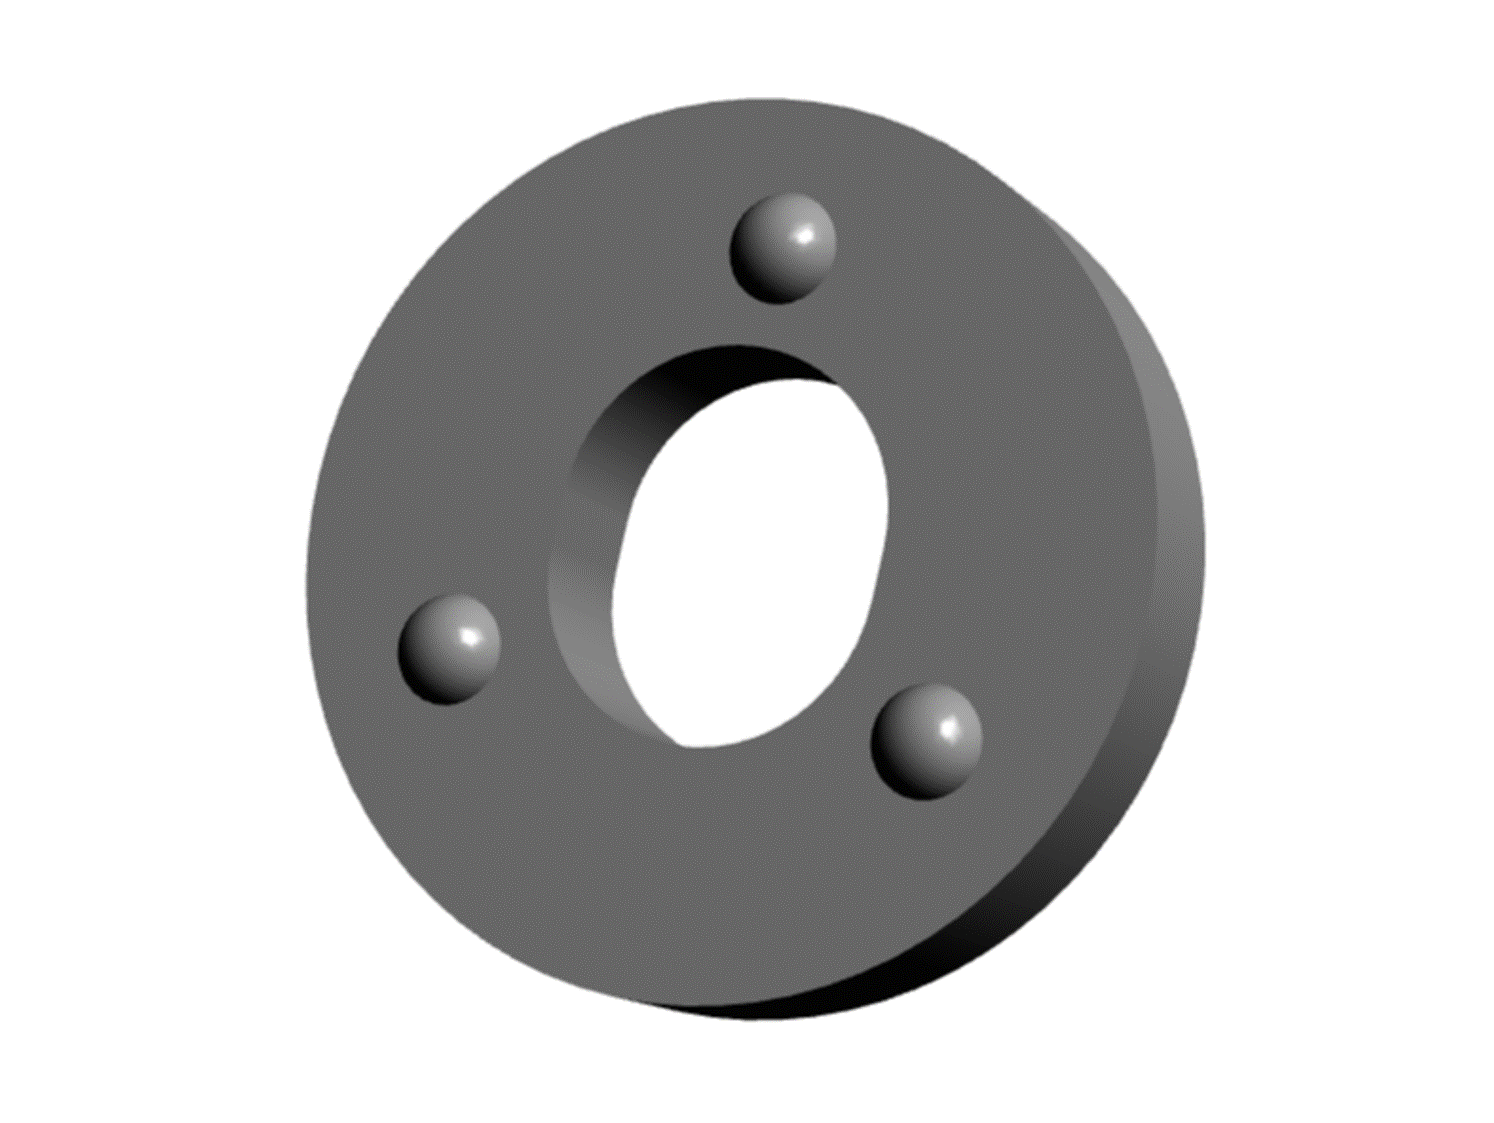 Washers for automobile seats